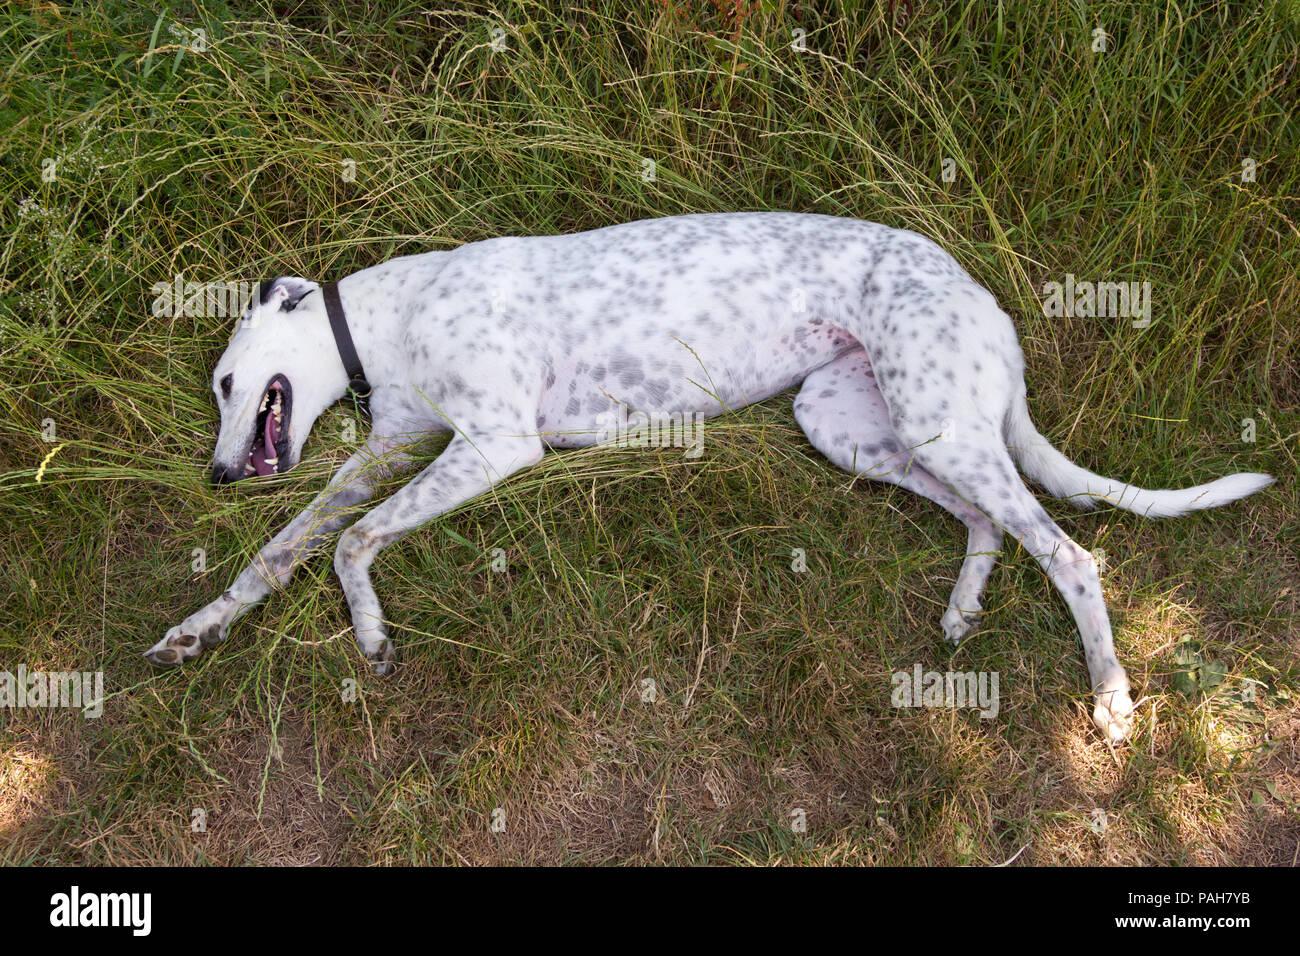 Greyhound Dog Lying Down On Grass Trying To Cool Down In Hot Weather Stock Photo Alamy